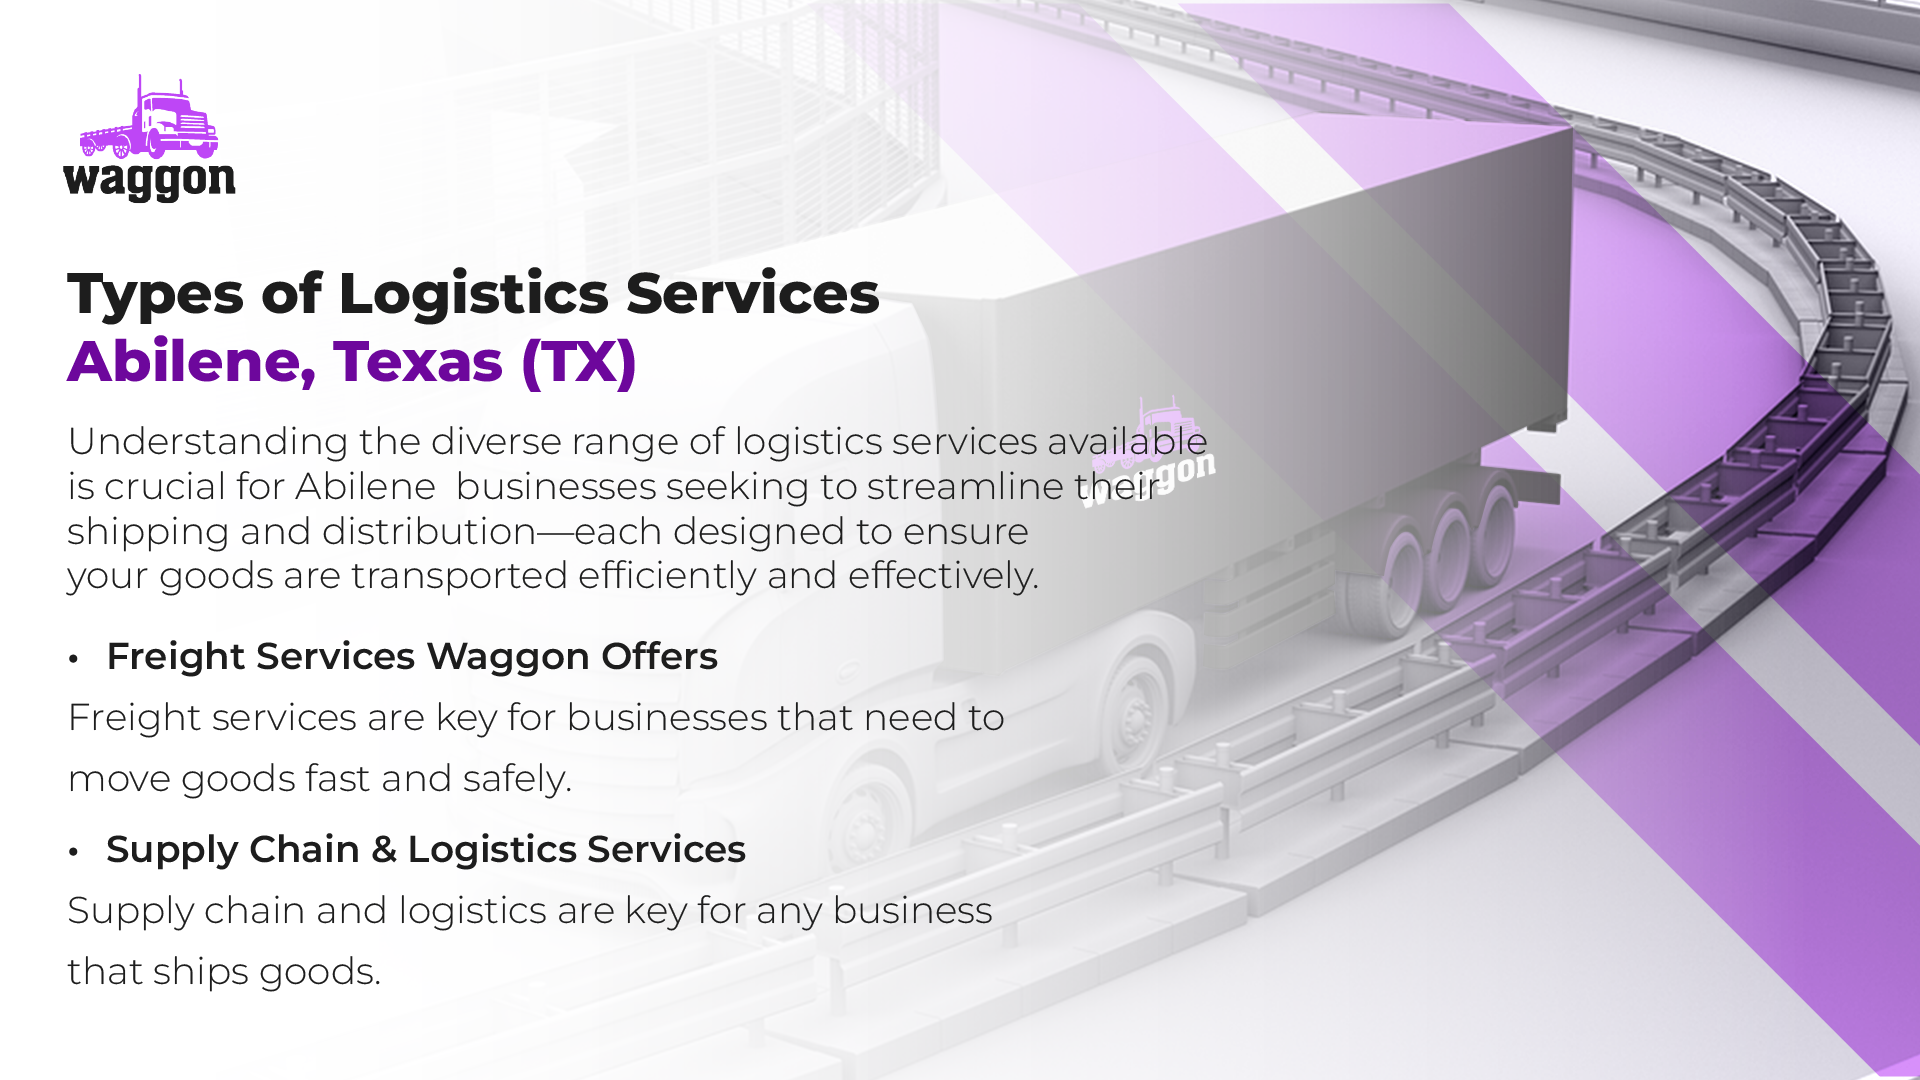 Types of Logistics Services in Abilene, Texas (TX)